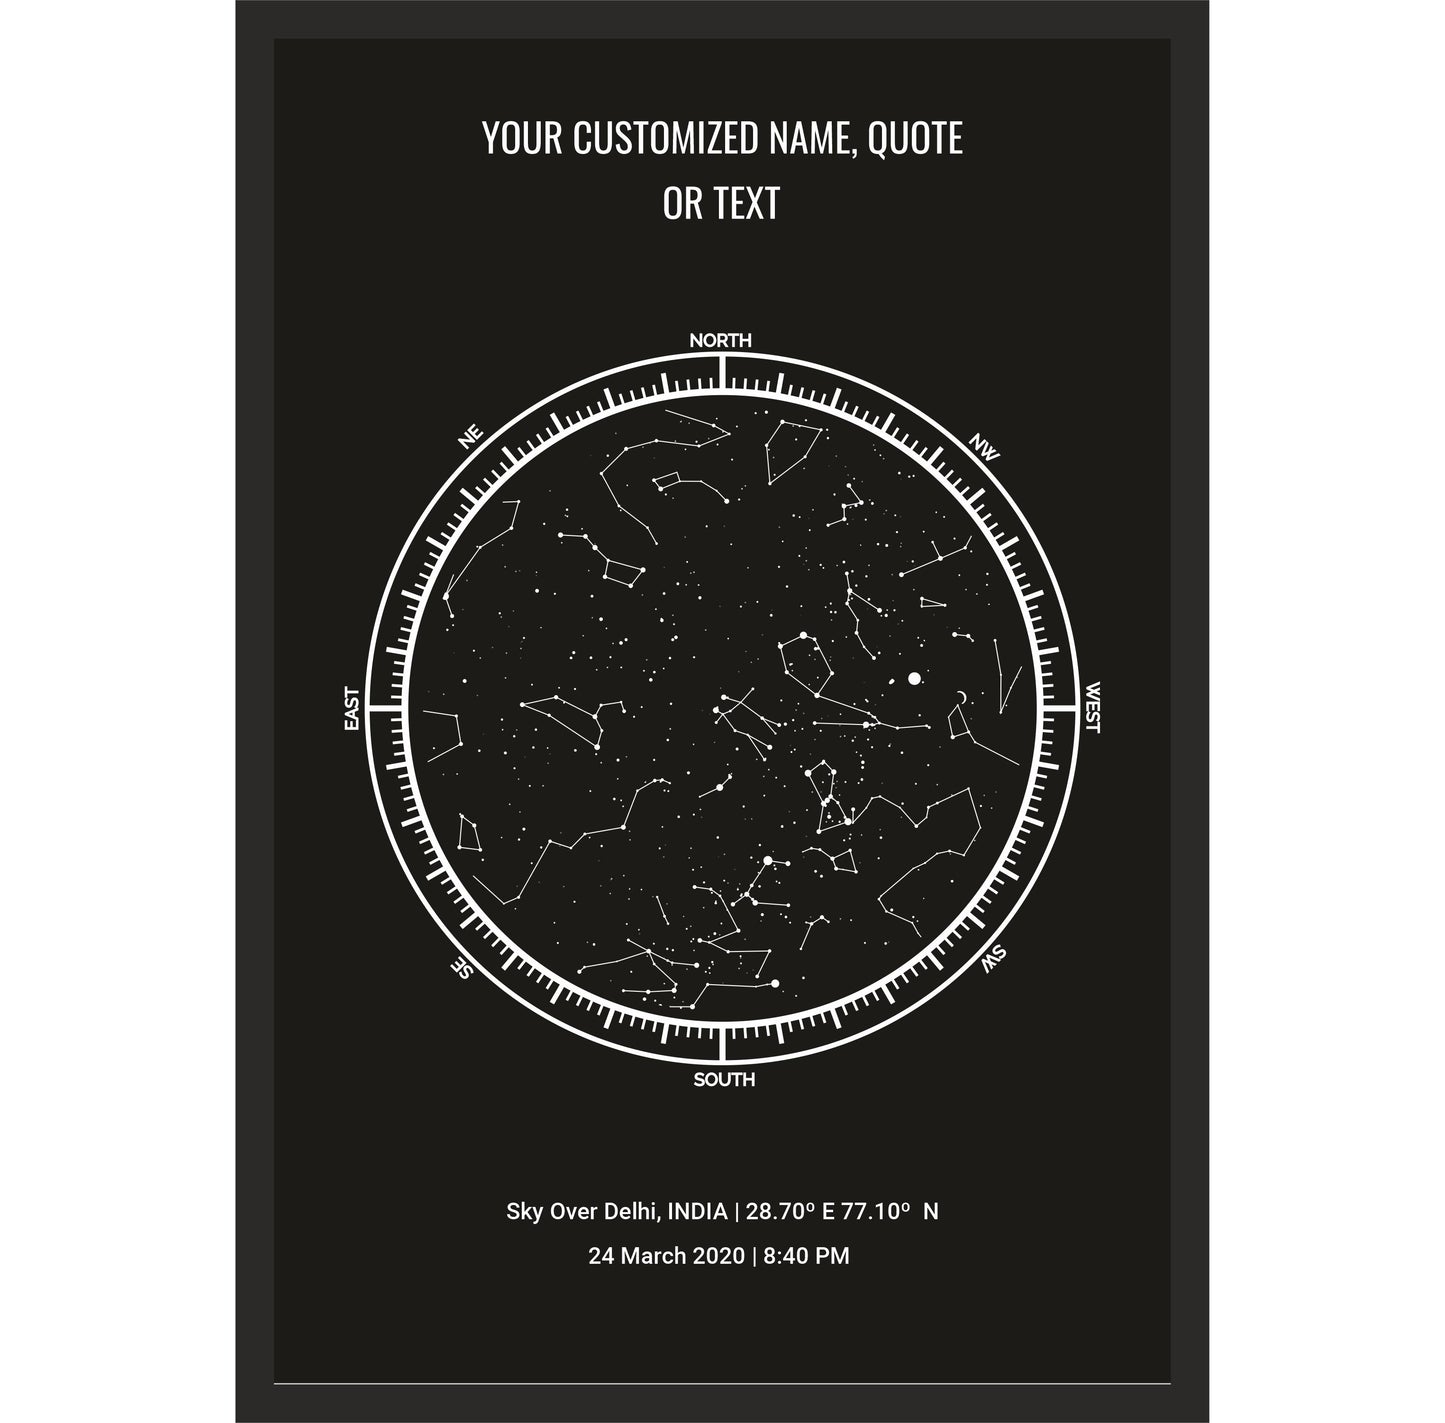 Customized Star Map Frame with Personal Quote or Message